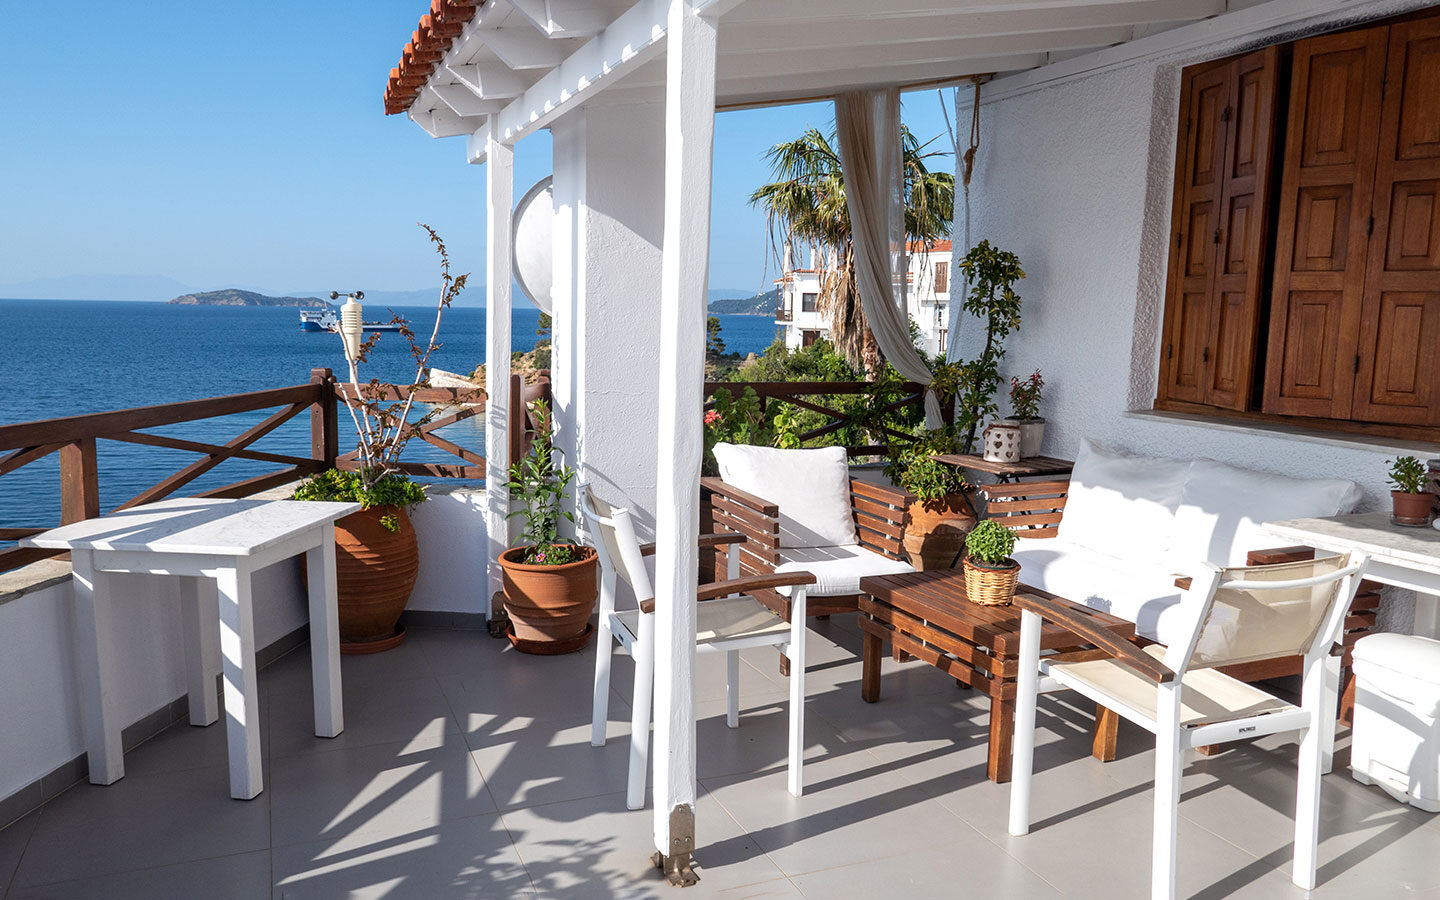 The balcony at Koula's House apartments – where to stay in Skiathos, Greece